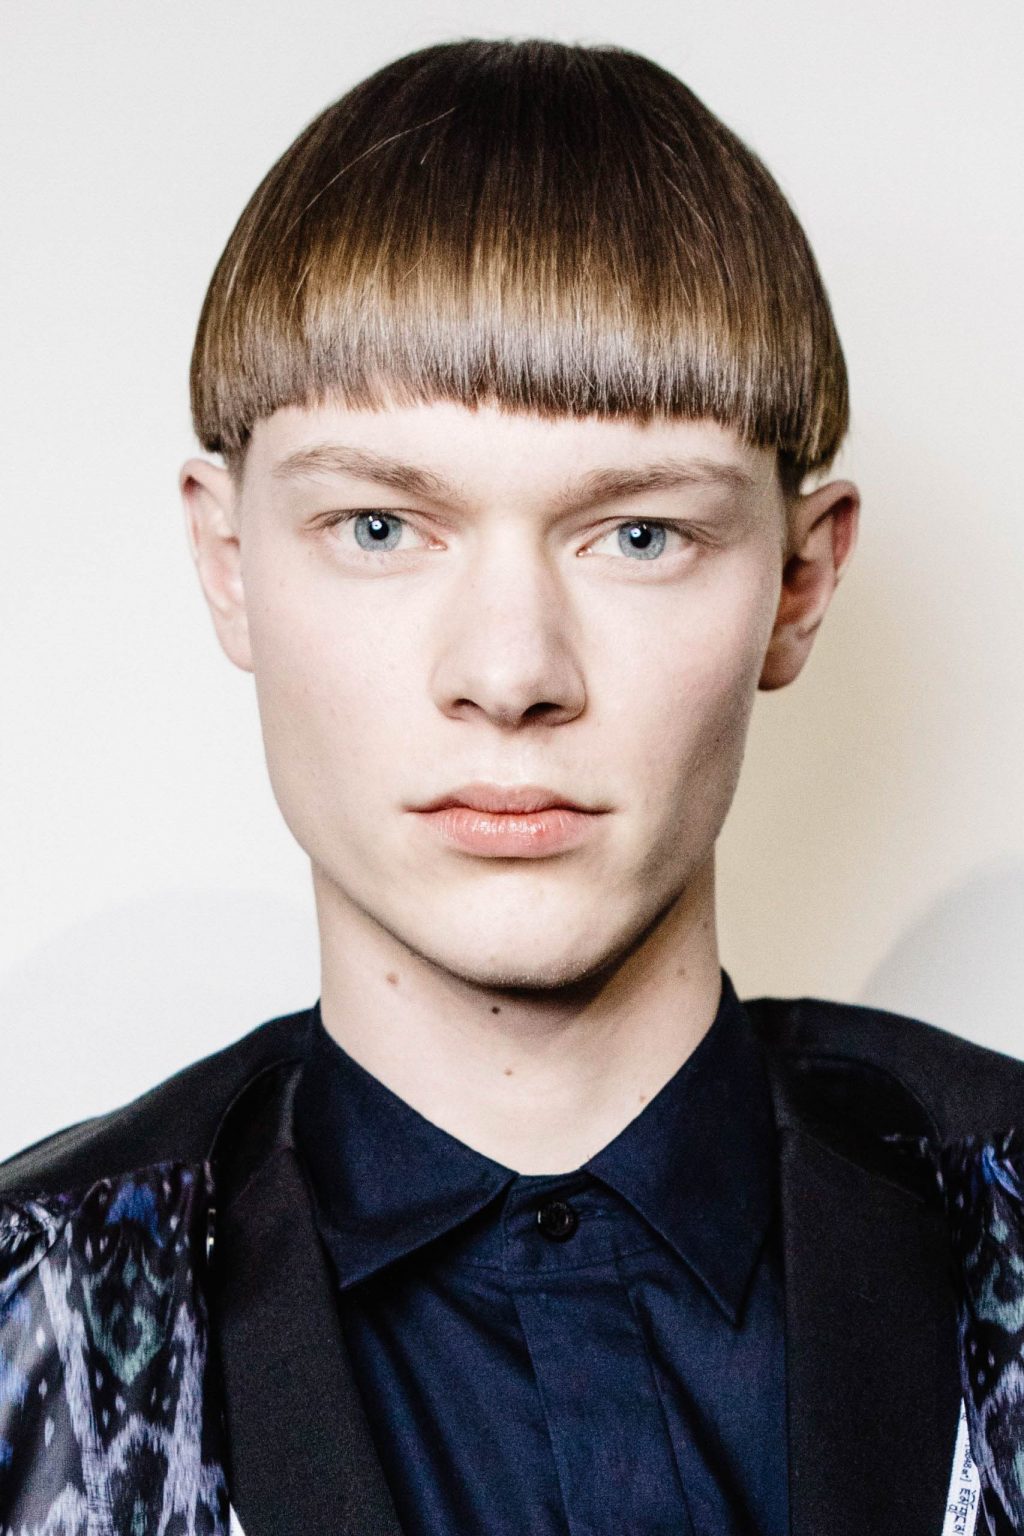 Best Bowl Cut Hairstyles & Haircut For Men [2021 Edition]